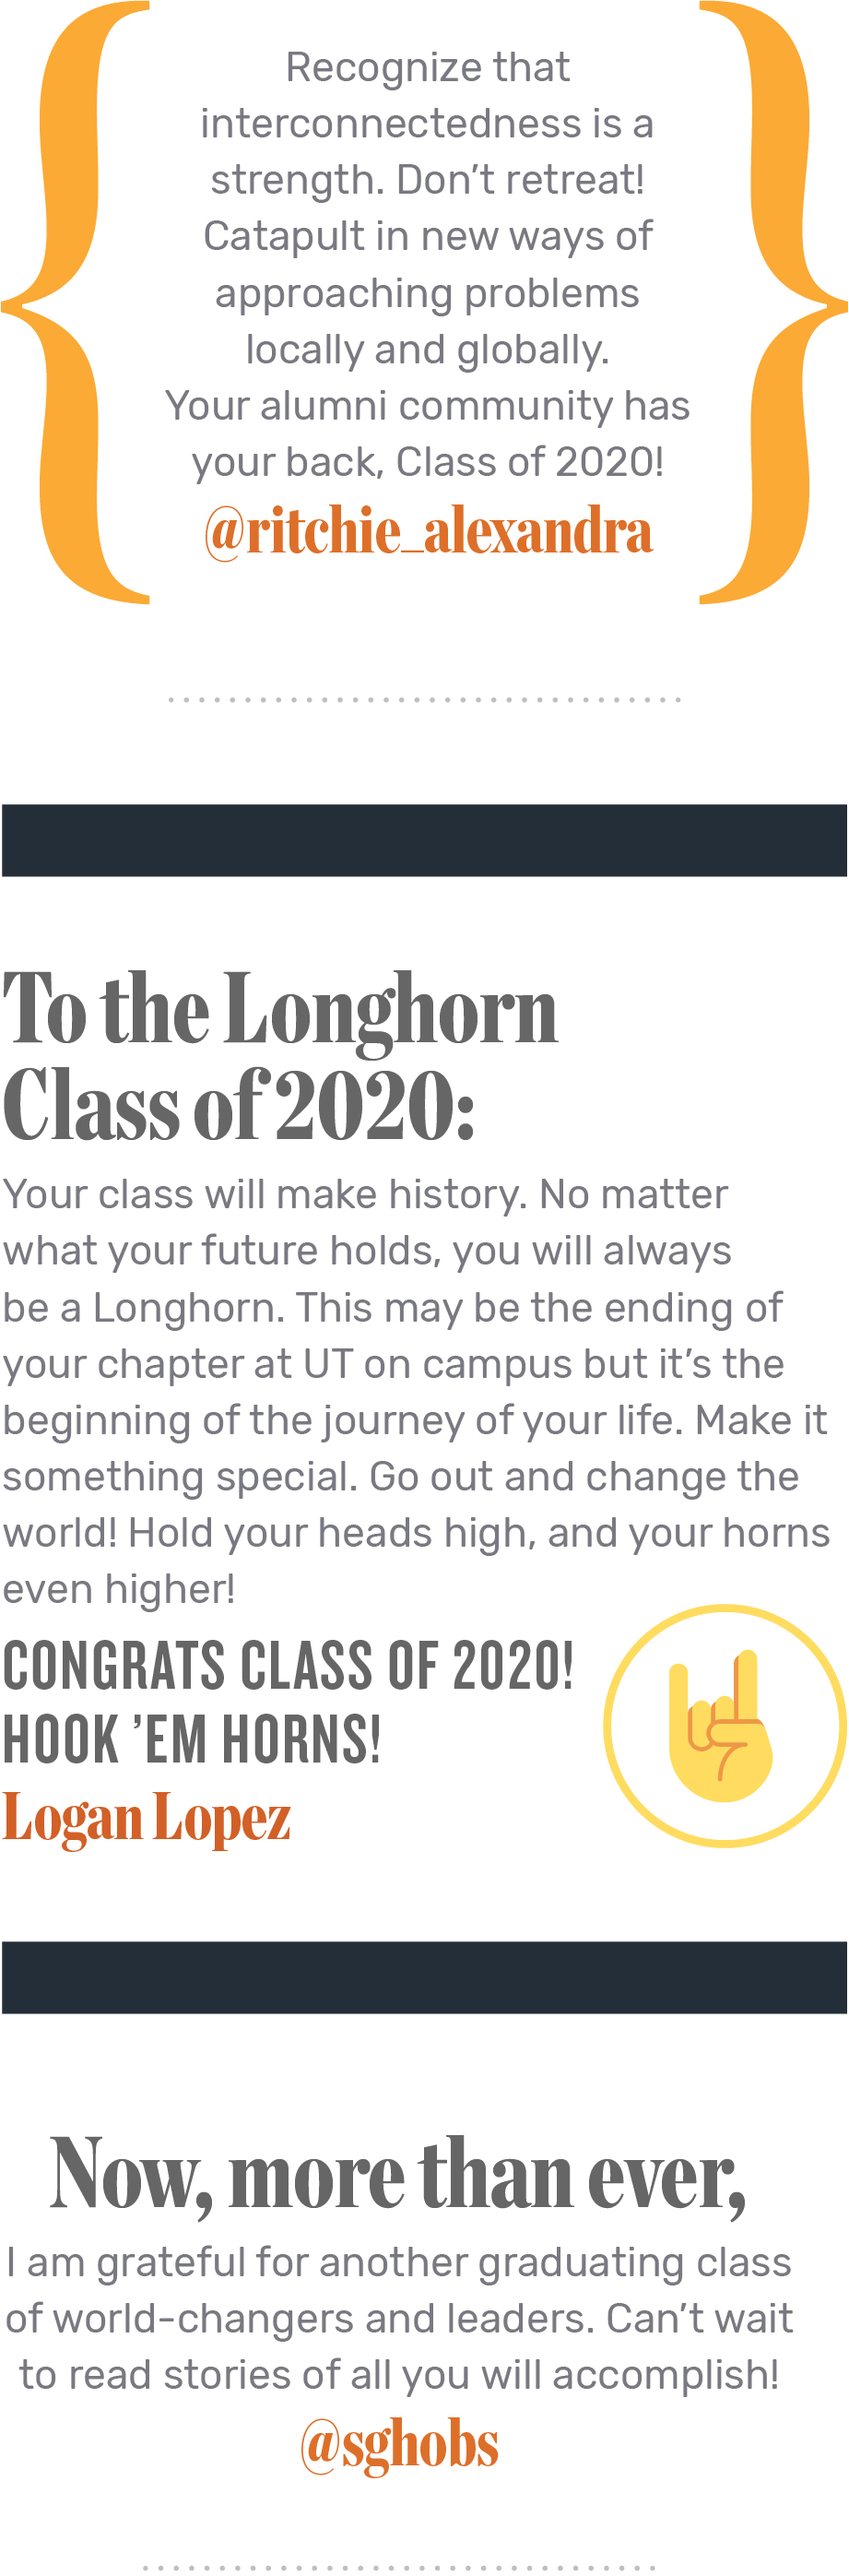 Messages for the Class of 2020